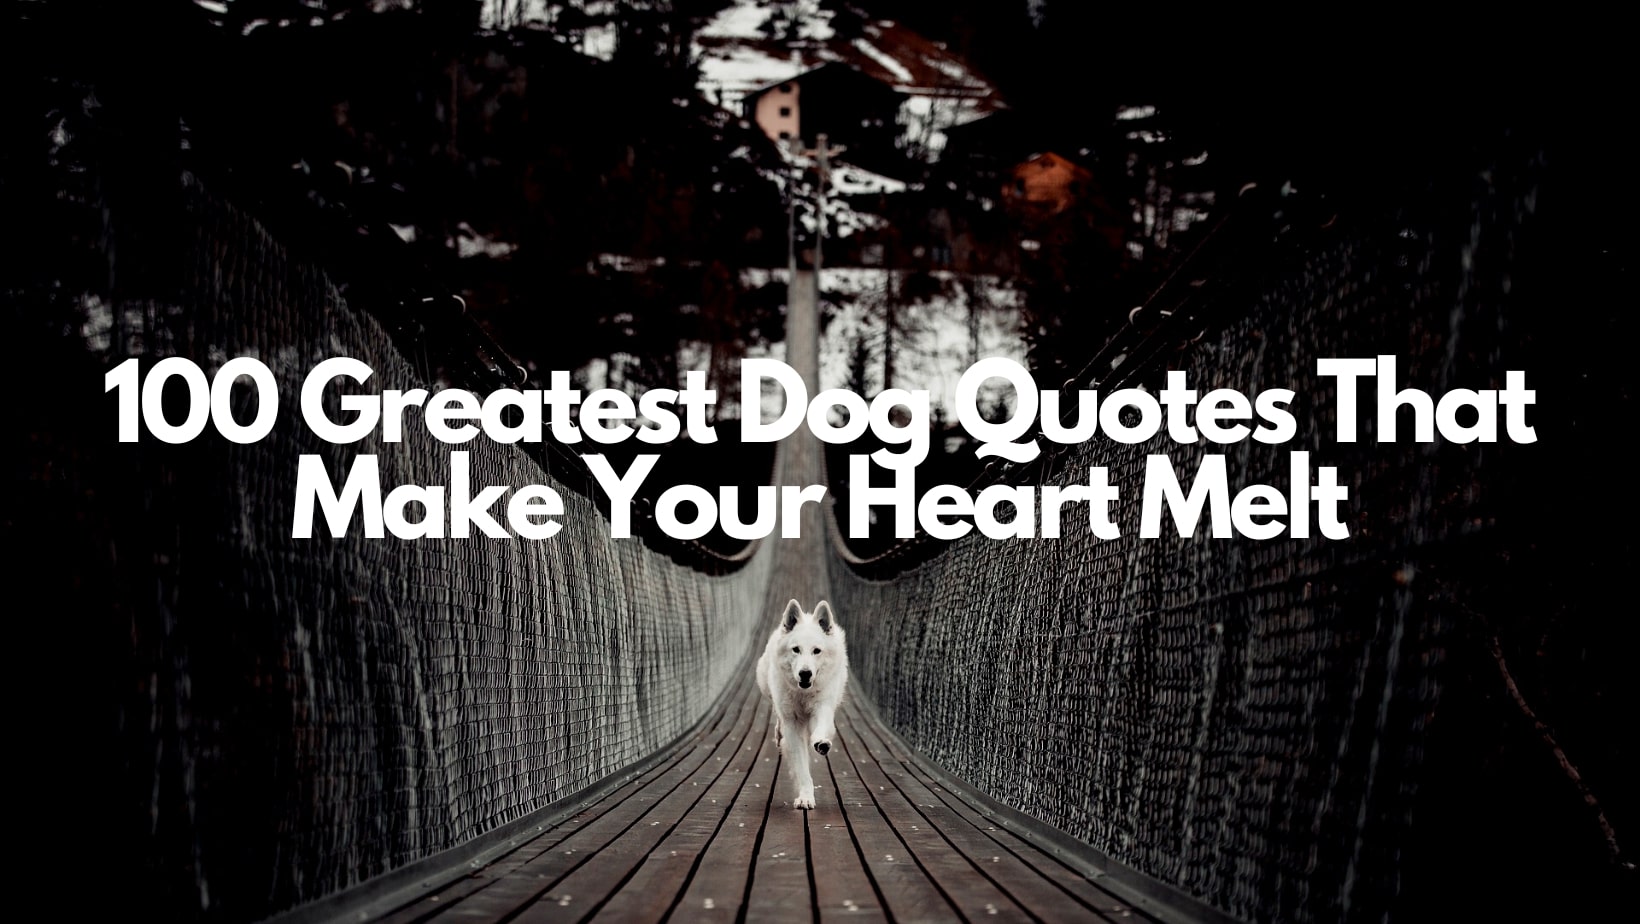 Dog quote feature image